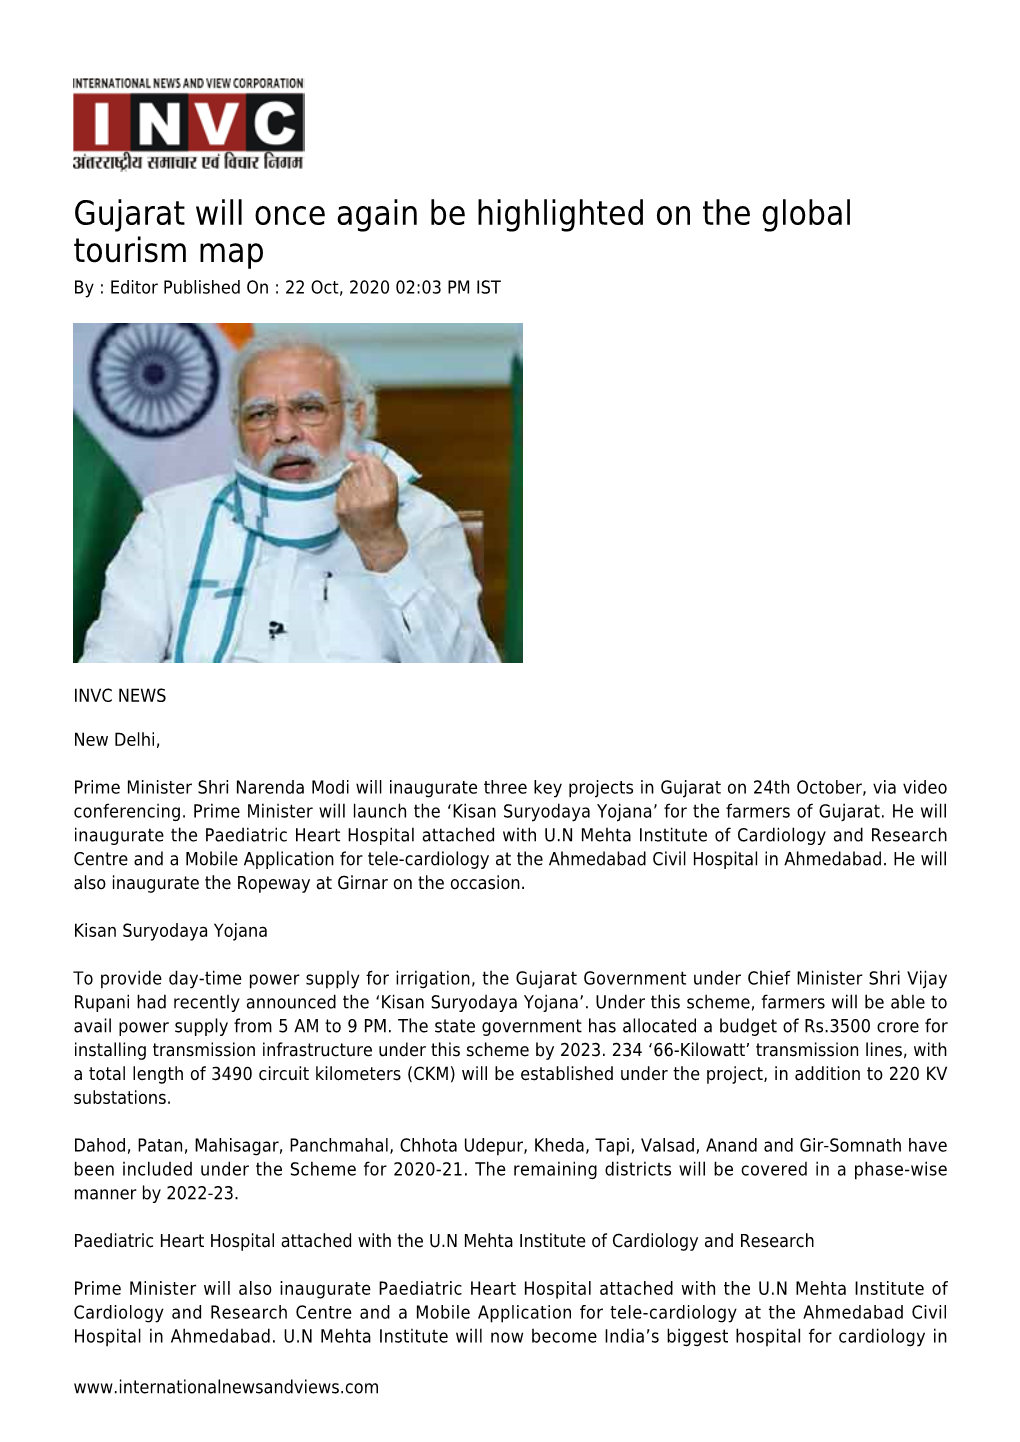 Gujarat Will Once Again Be Highlighted on the Global Tourism Map by : Editor Published on : 22 Oct, 2020 02:03 PM IST